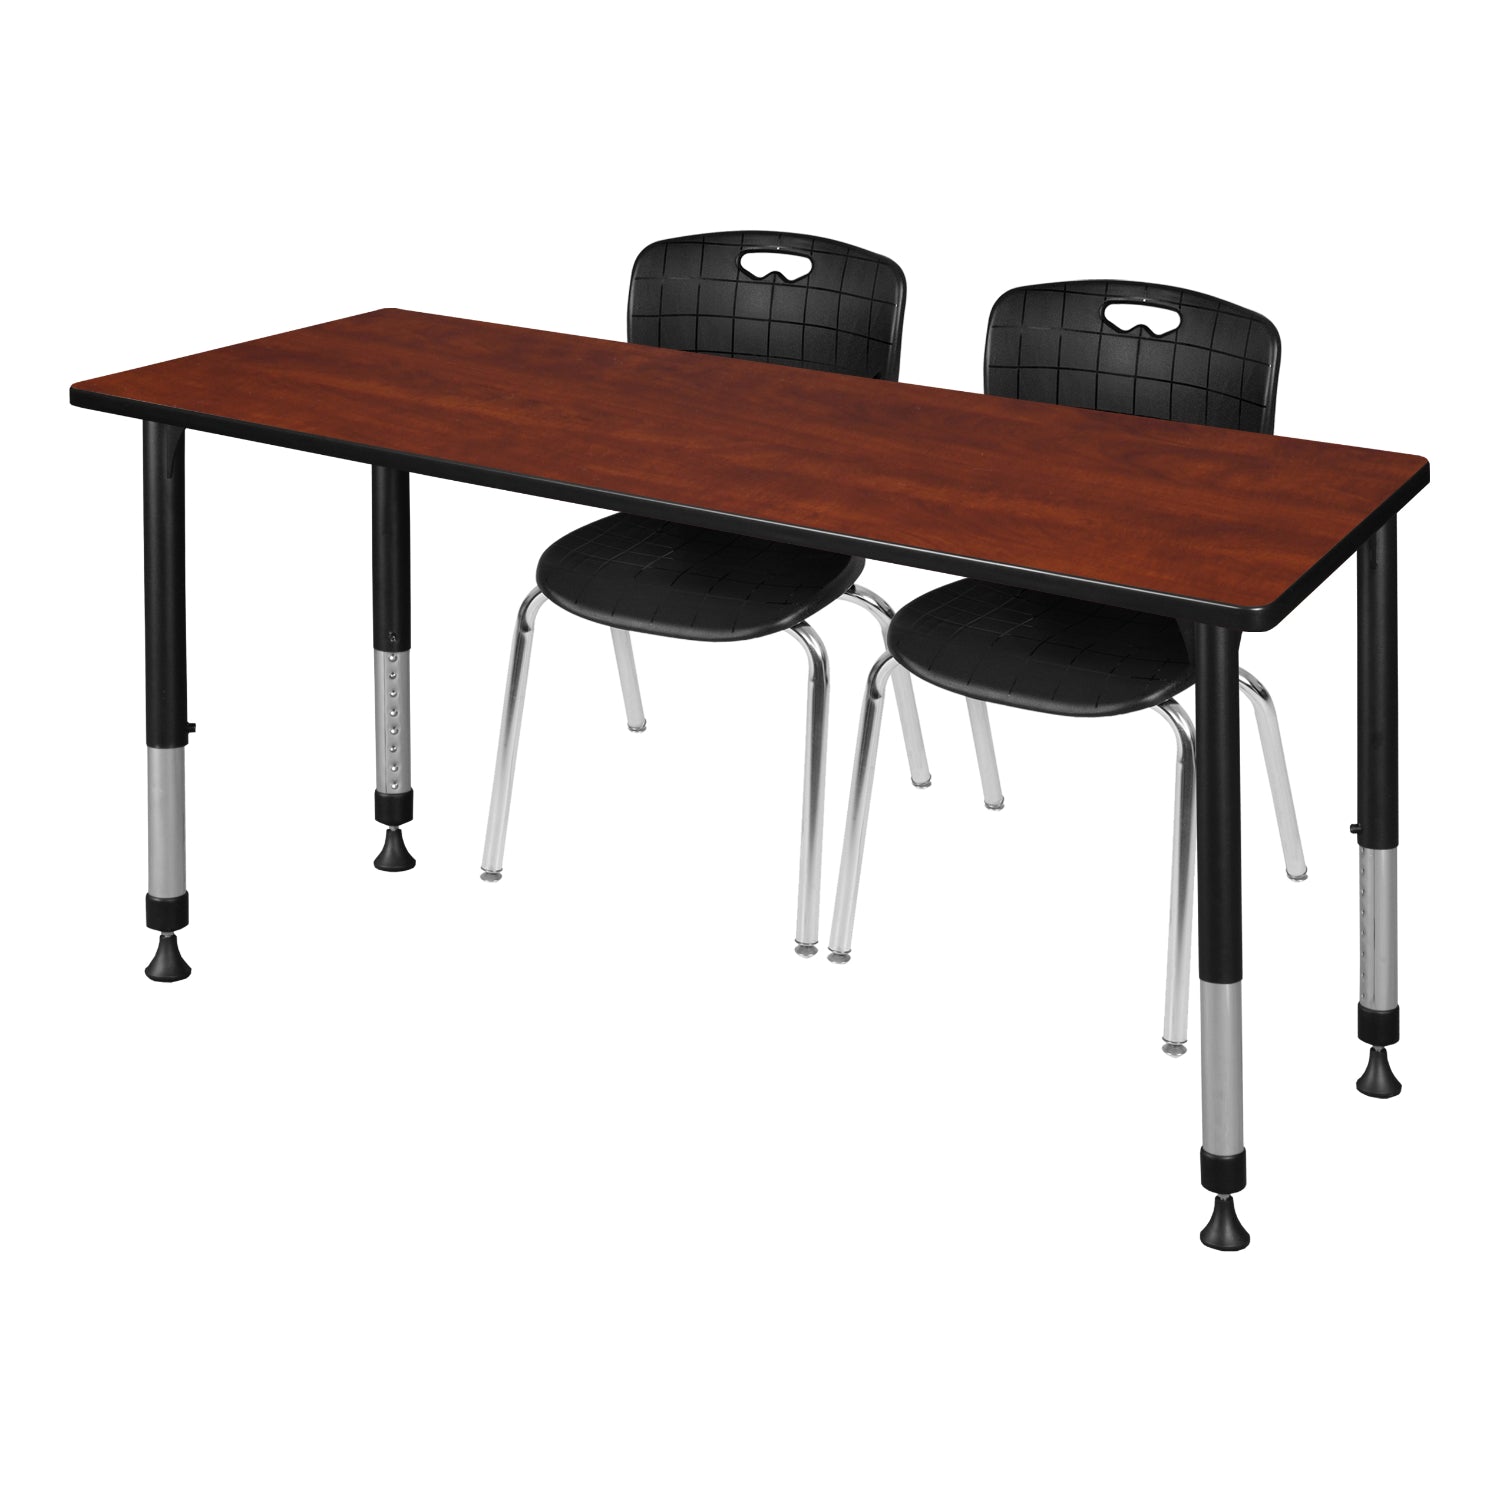 Kee Classroom Table and Chair Package, Kee 66" x 30" Rectangular Adjustable Height Table with 2 Andy 18" Stack Chairs